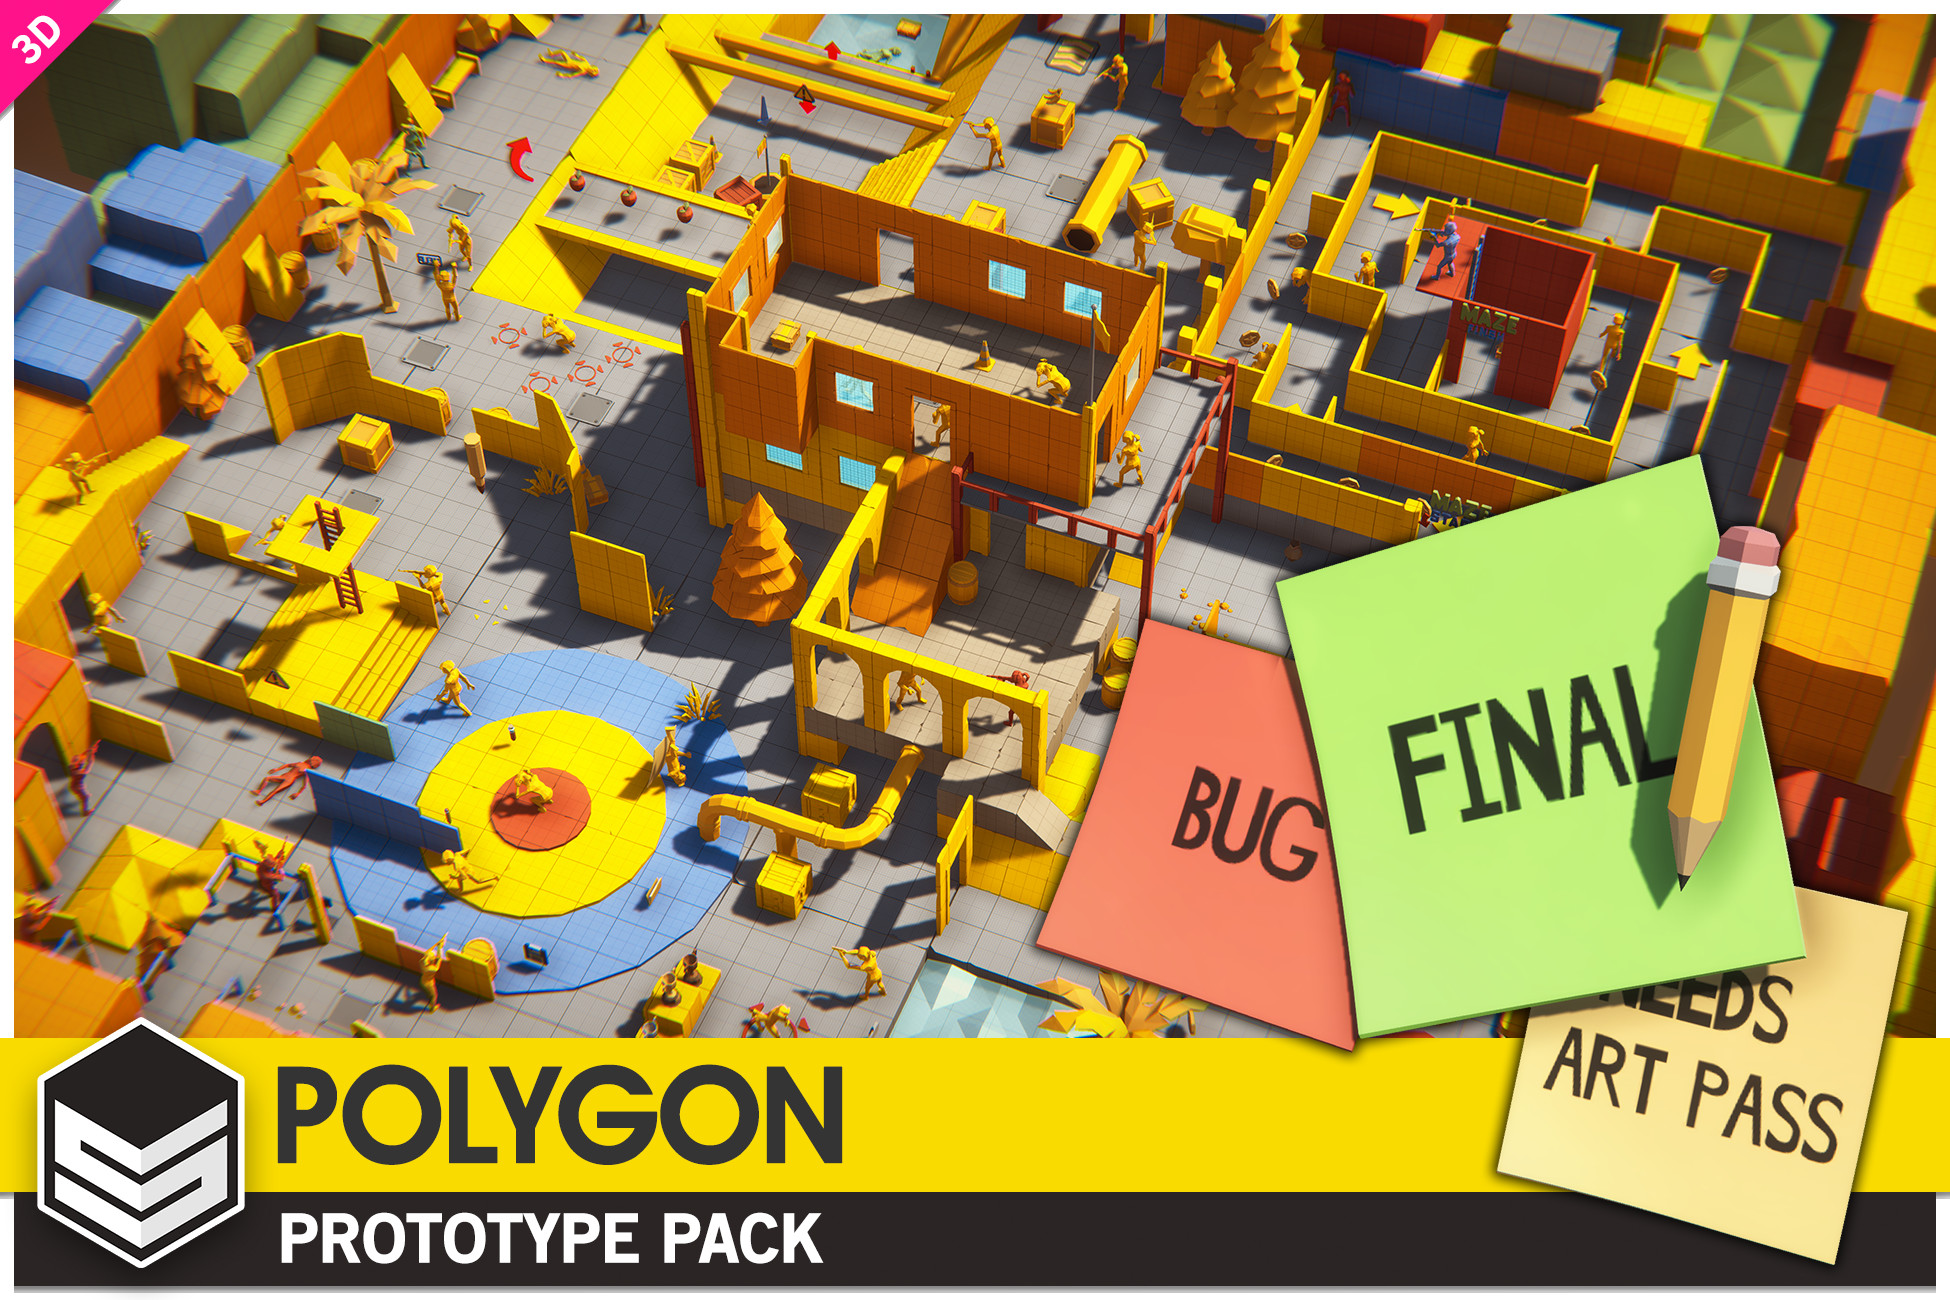 POLYGON Prototype free download for the unity game engine.